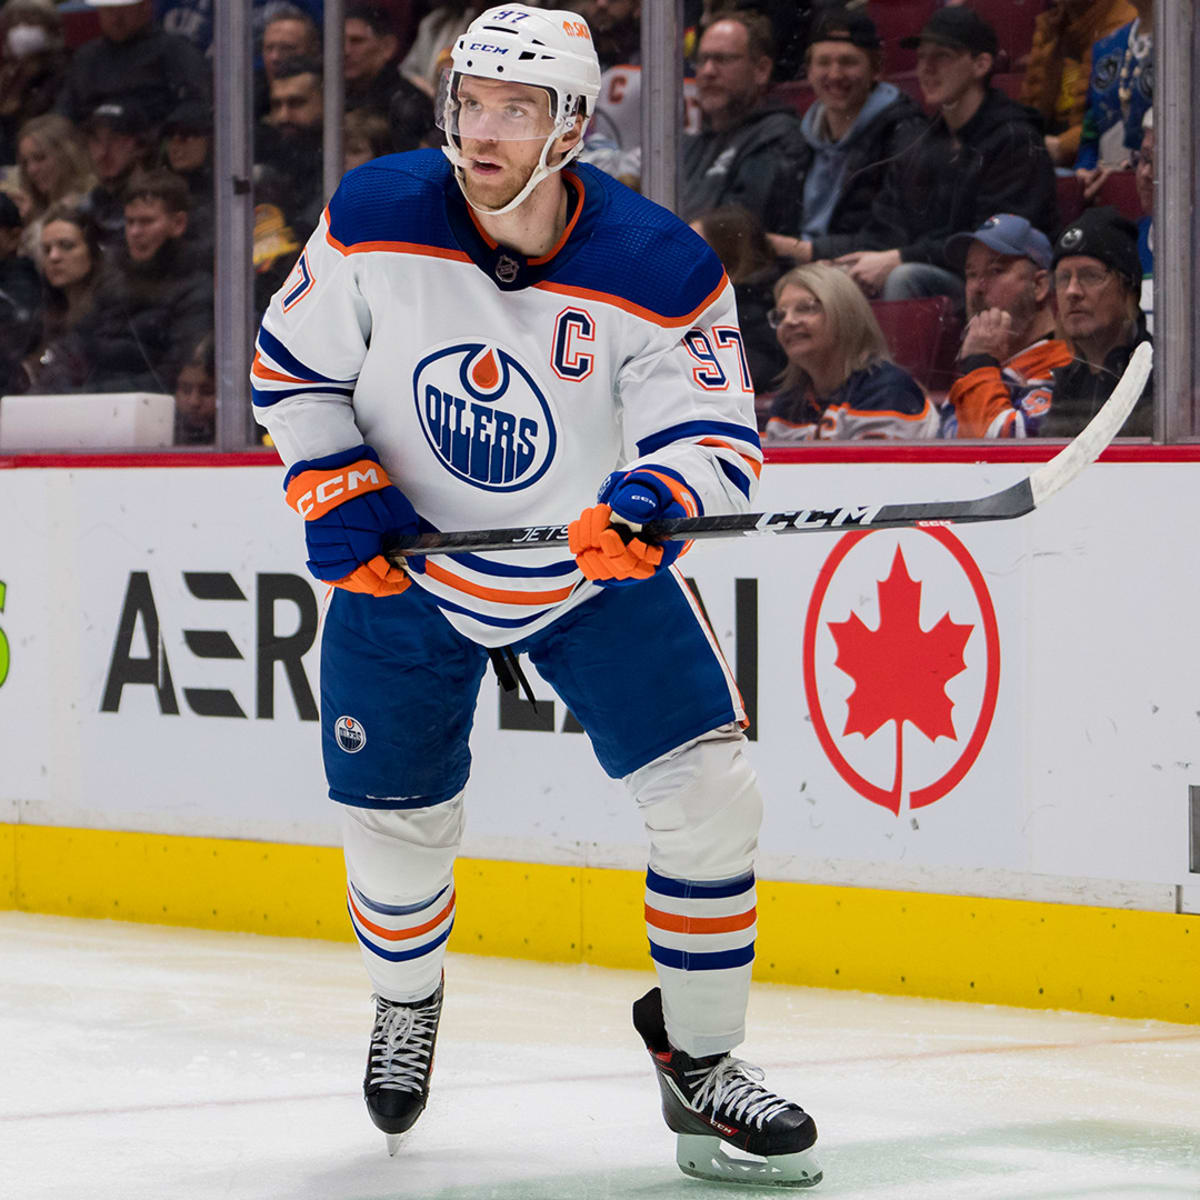 Watch Edmonton Oilers at Seattle Kraken Stream NHL live, TV - How to Watch and Stream Major League and College Sports